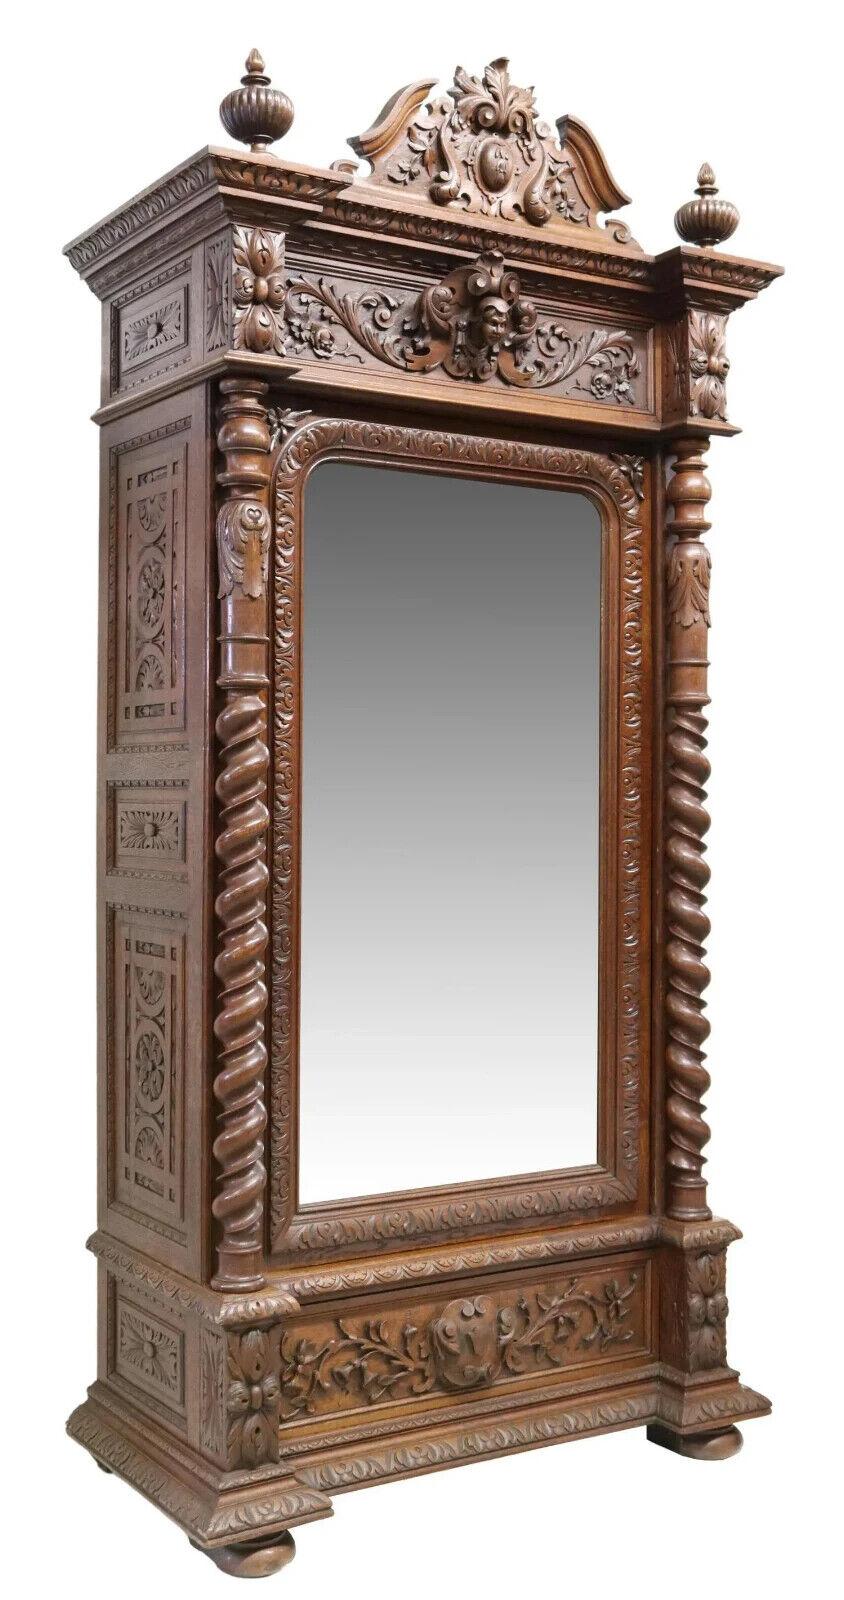 Outstanding Antique Bonnetiere, French Henri II Style, Carved Oak, Crest, Foliates,  1800's, 19th Century!

French Henri II style oak Bonnetiere, 19th c., the whole carved in foliates throughout, having pediment crest, flanked by gadrooned finials,